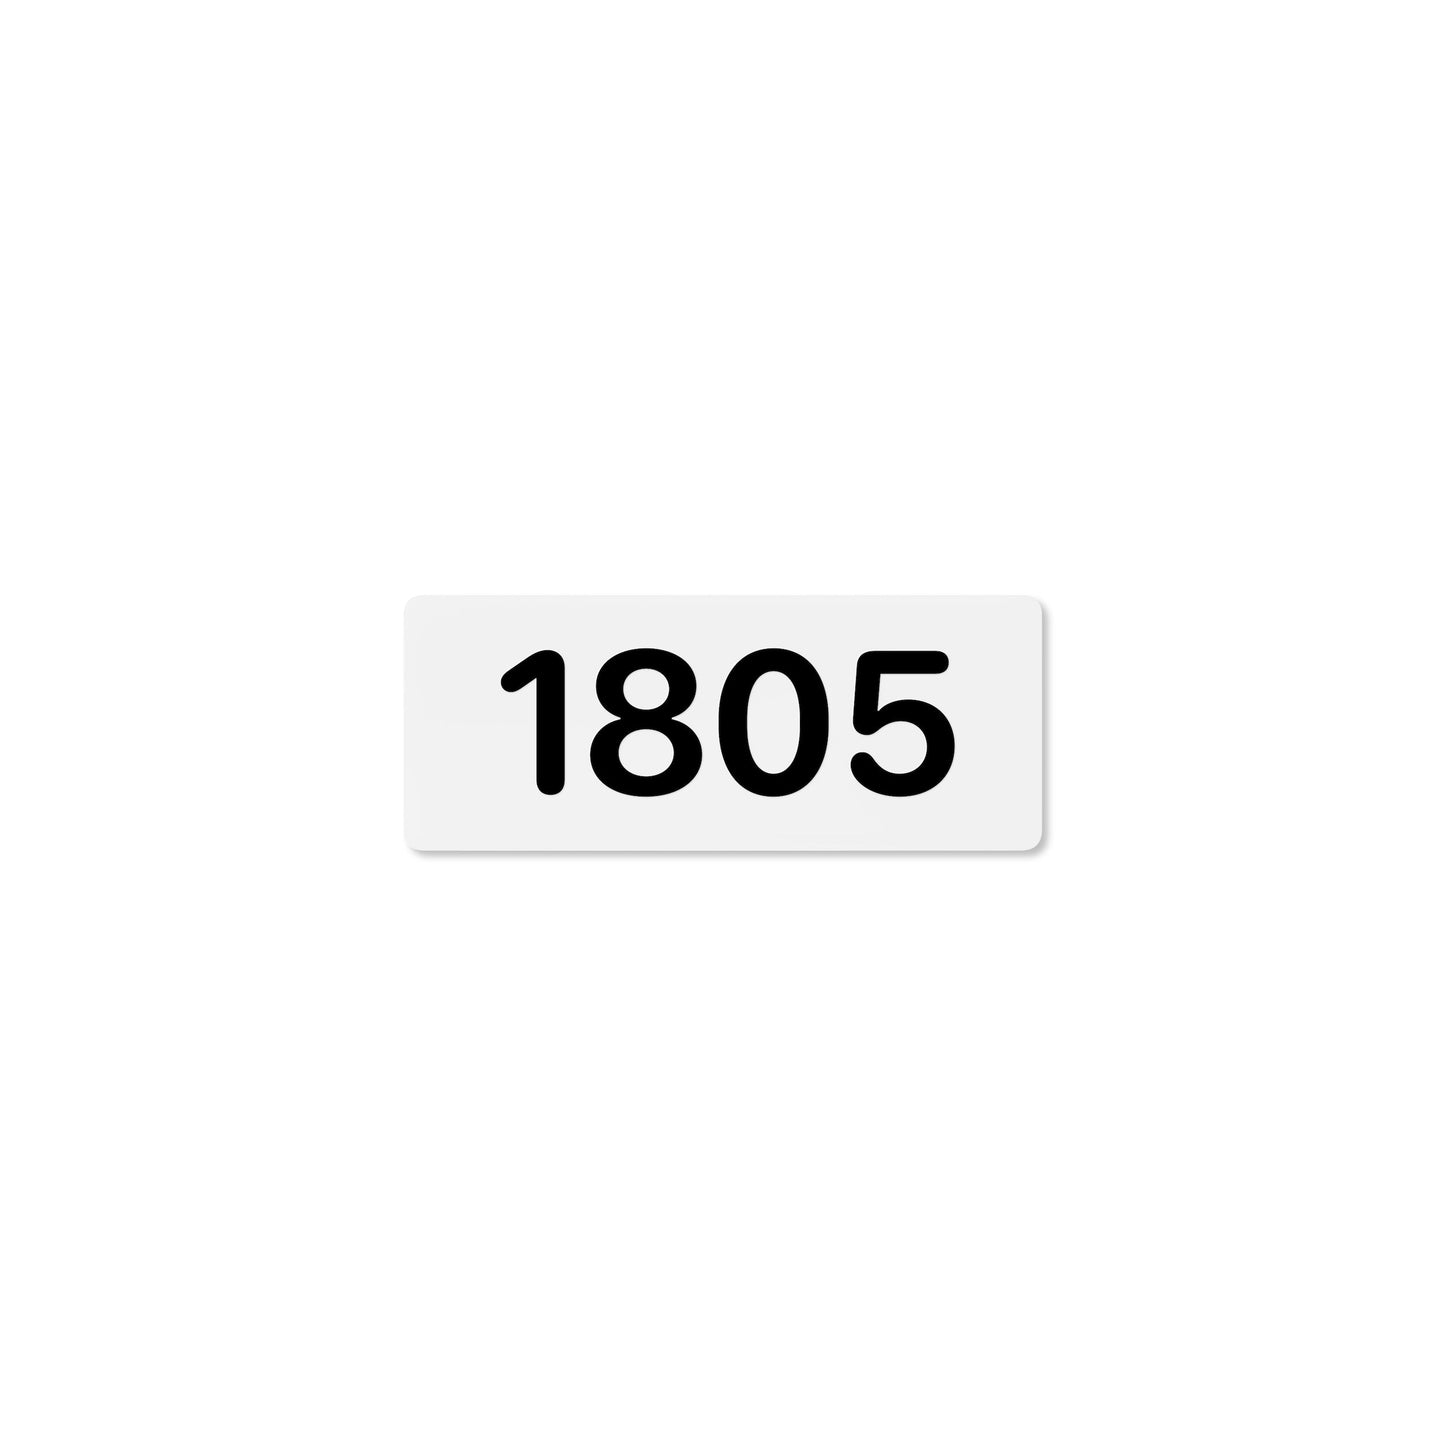 Numeral 1805